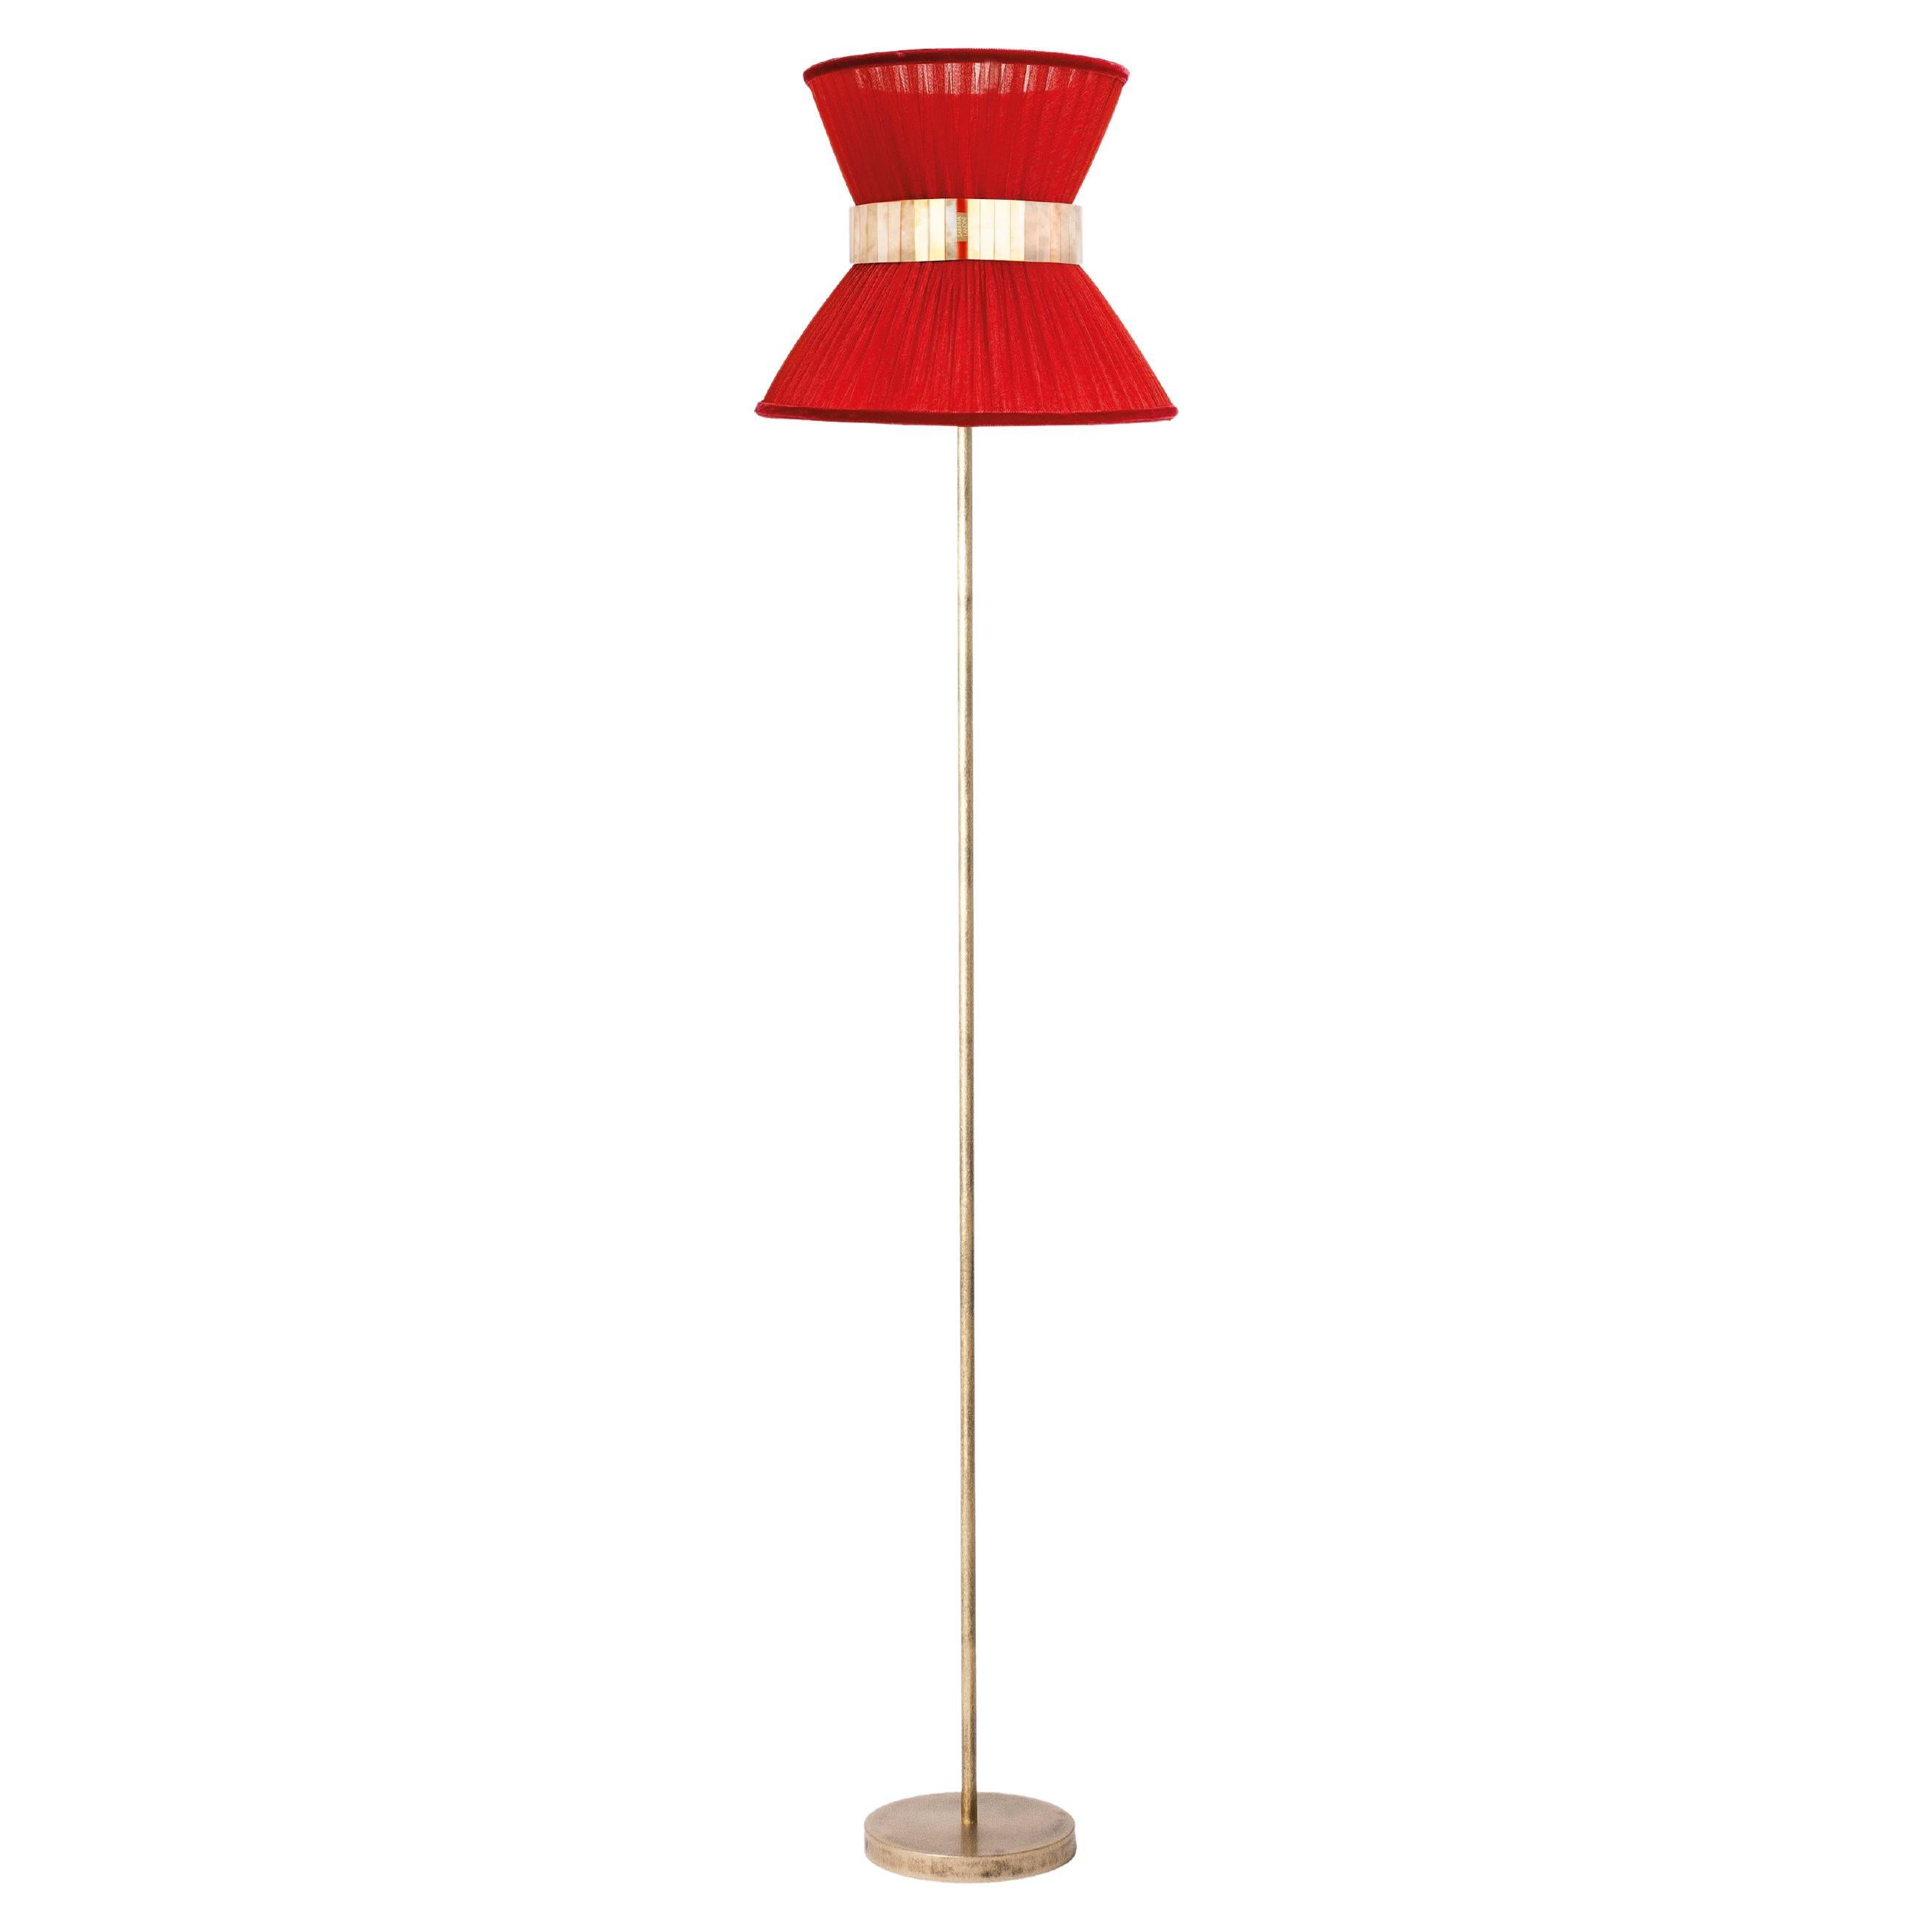 "Tiffany" Floor Lamp 30 Rust-Red Silk, Antiqued Silvered Glass, Brass